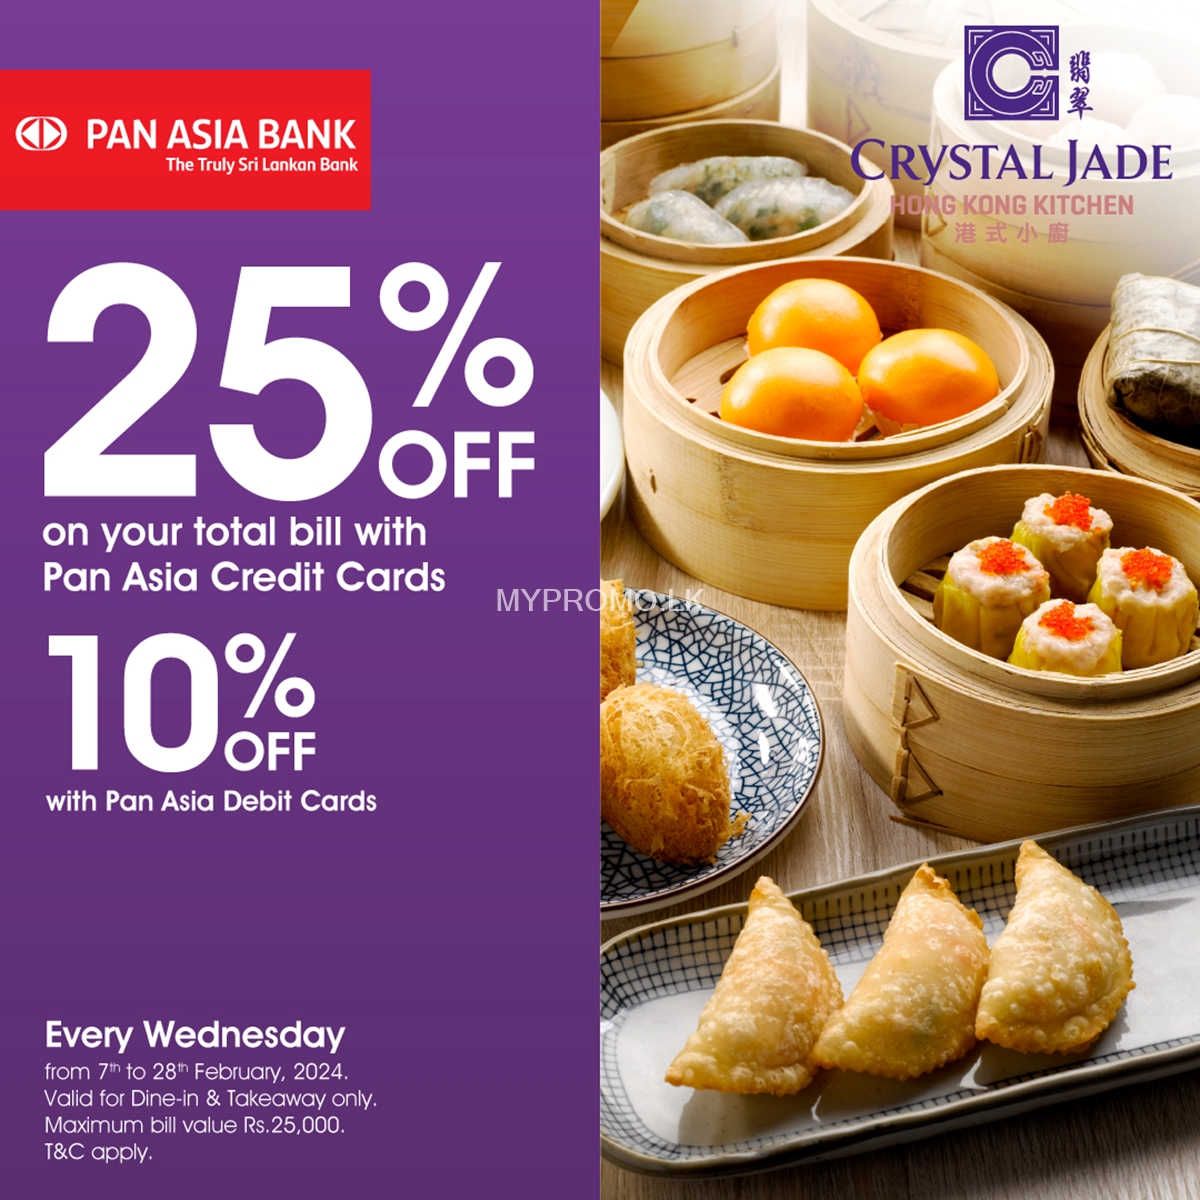 Get up to 25% off for Pan Asia Bank Cards at Crystal Jade